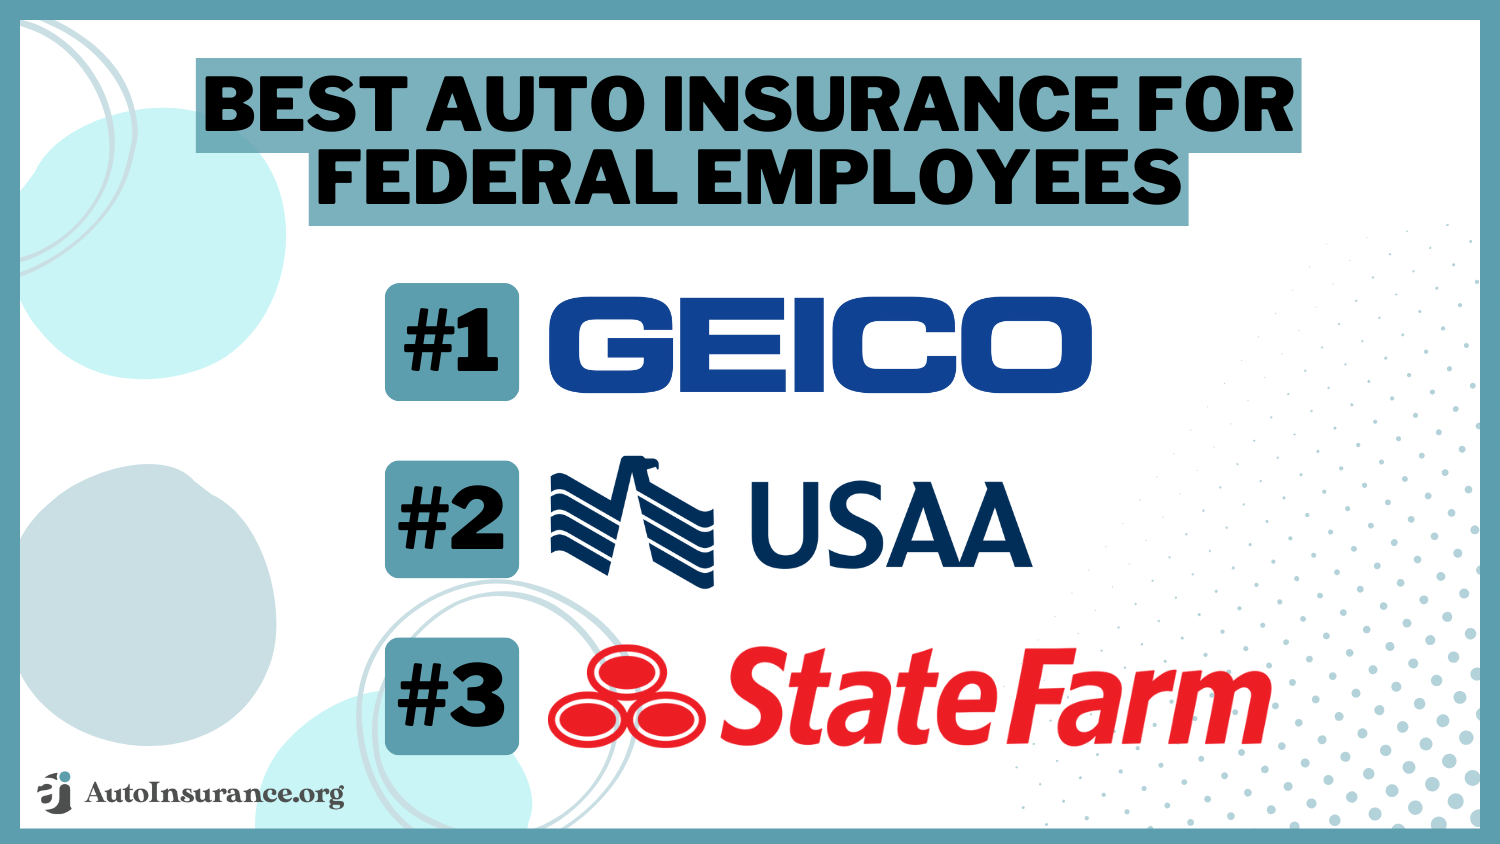 Best Auto Insurance for Federal Employees